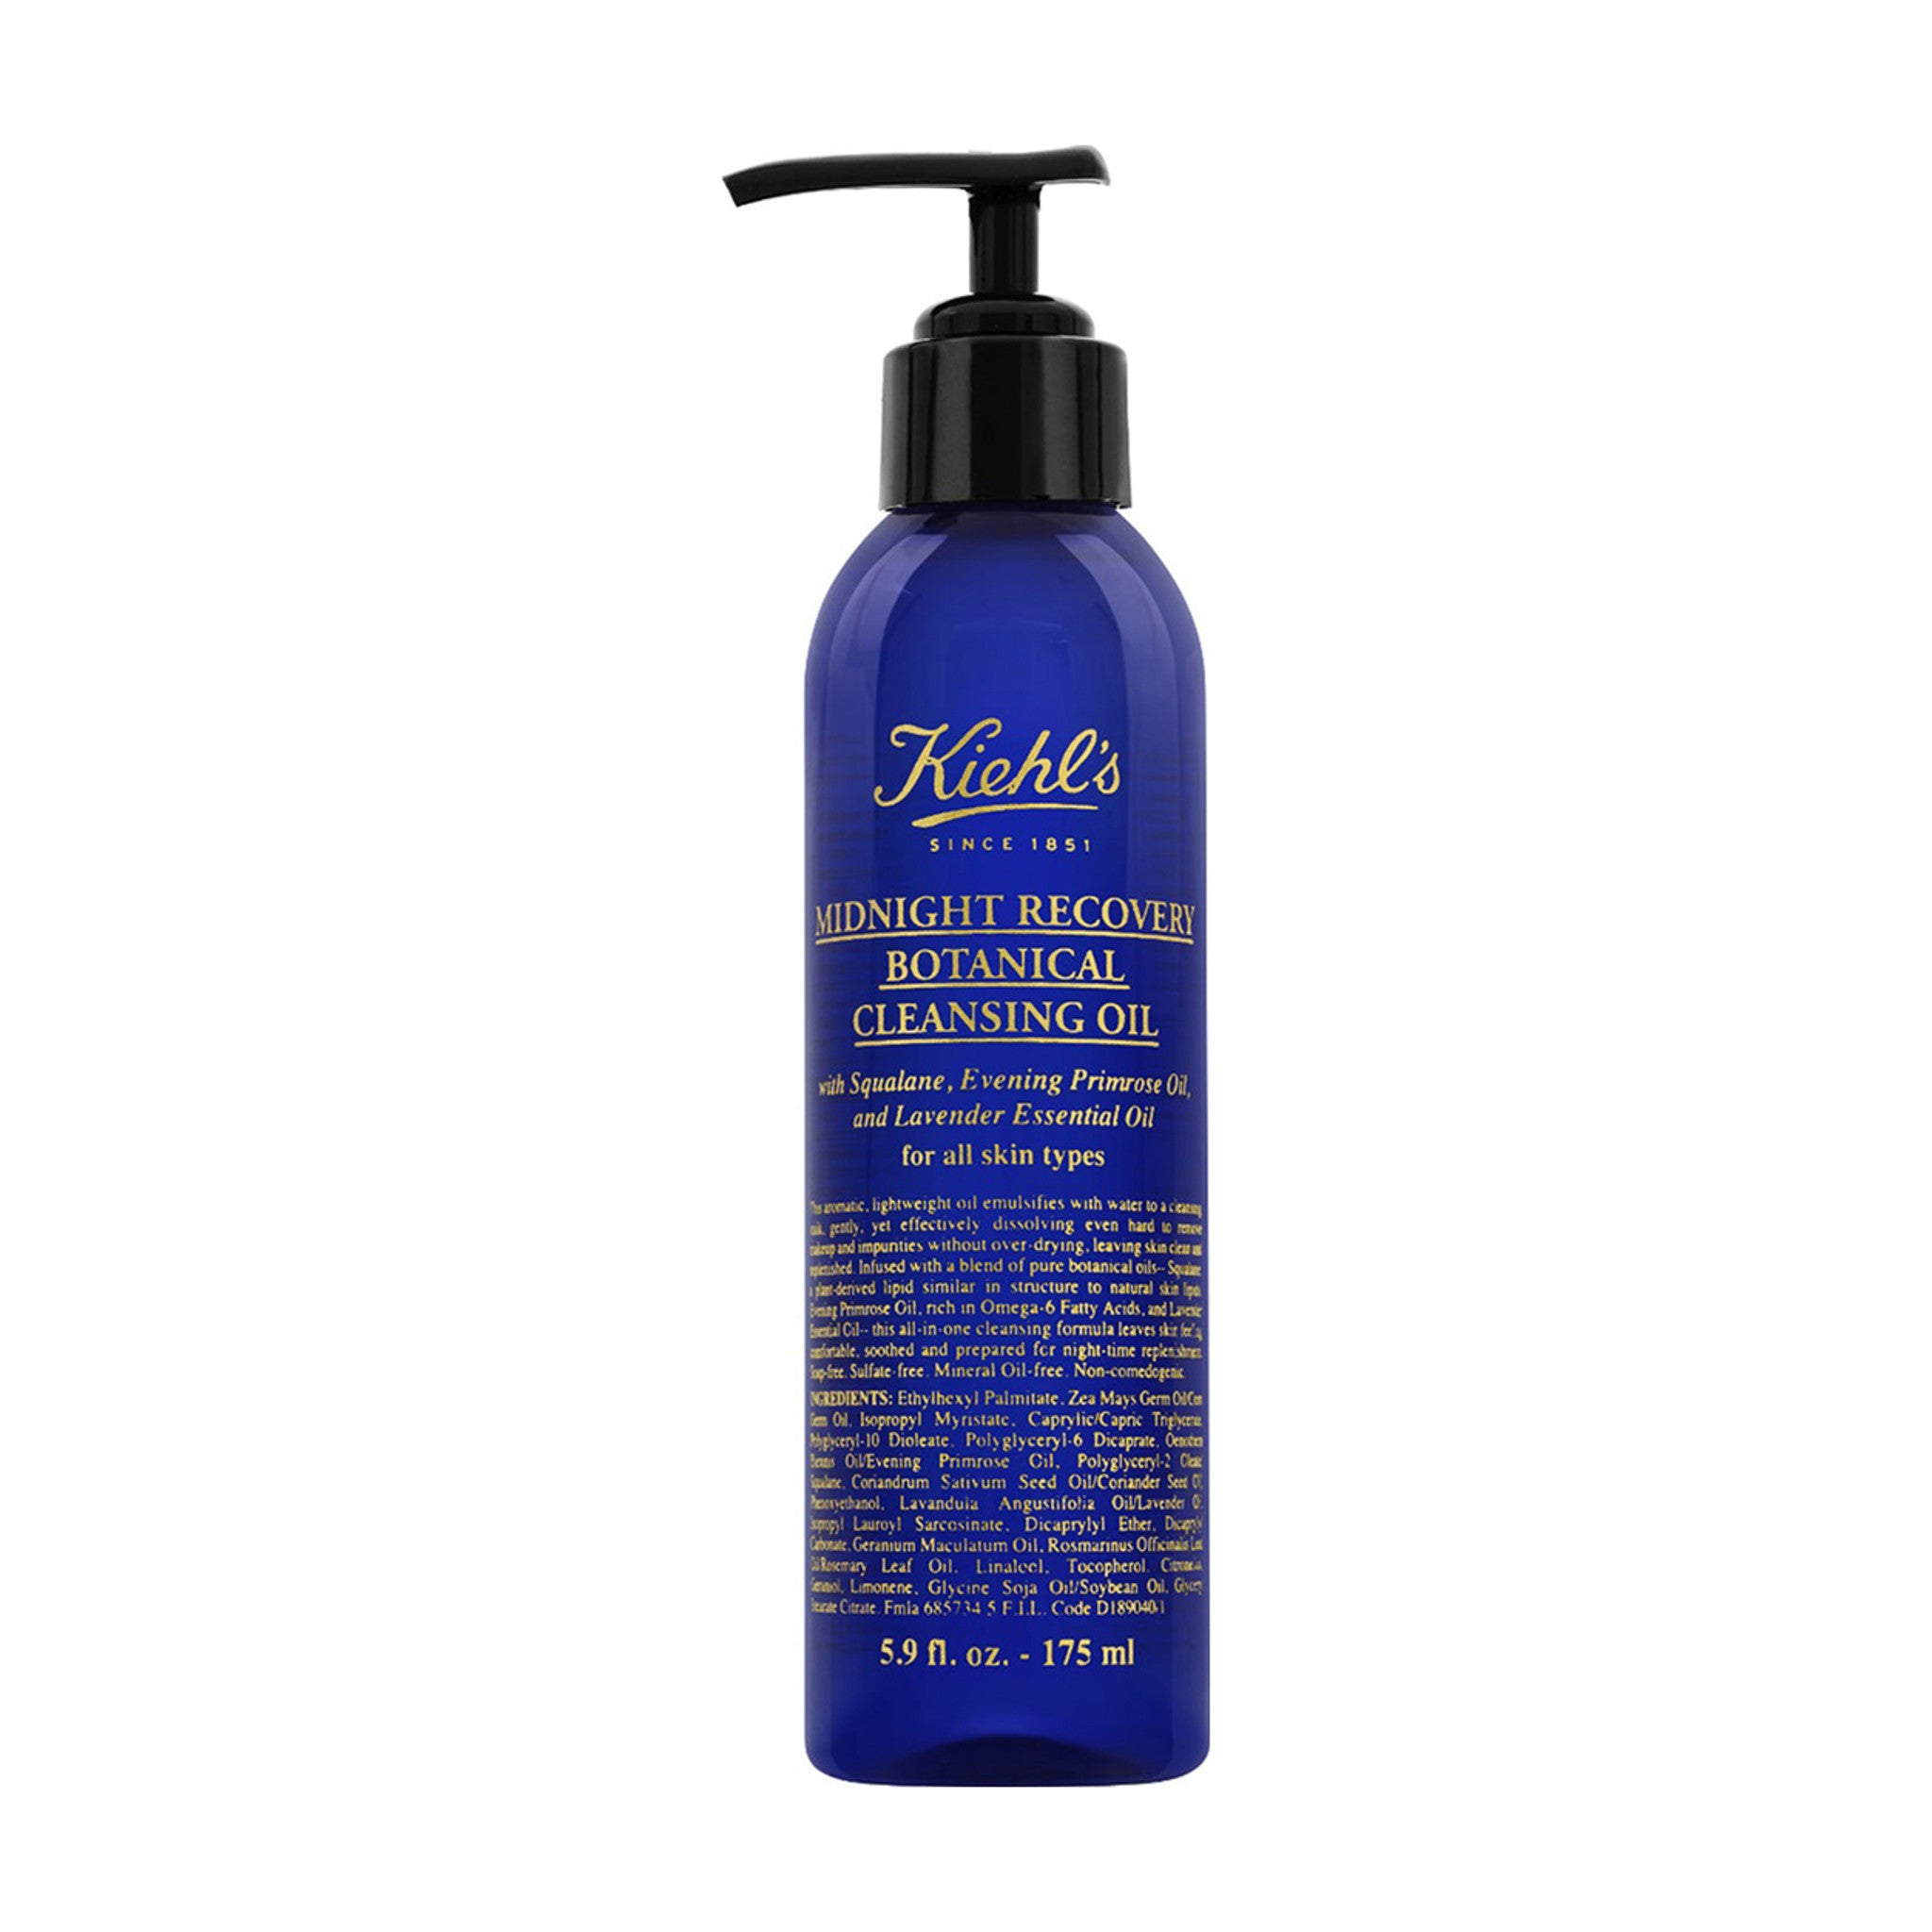 Kiehl's Since 1851 Midnight Recovery Cleansing Oil main image.